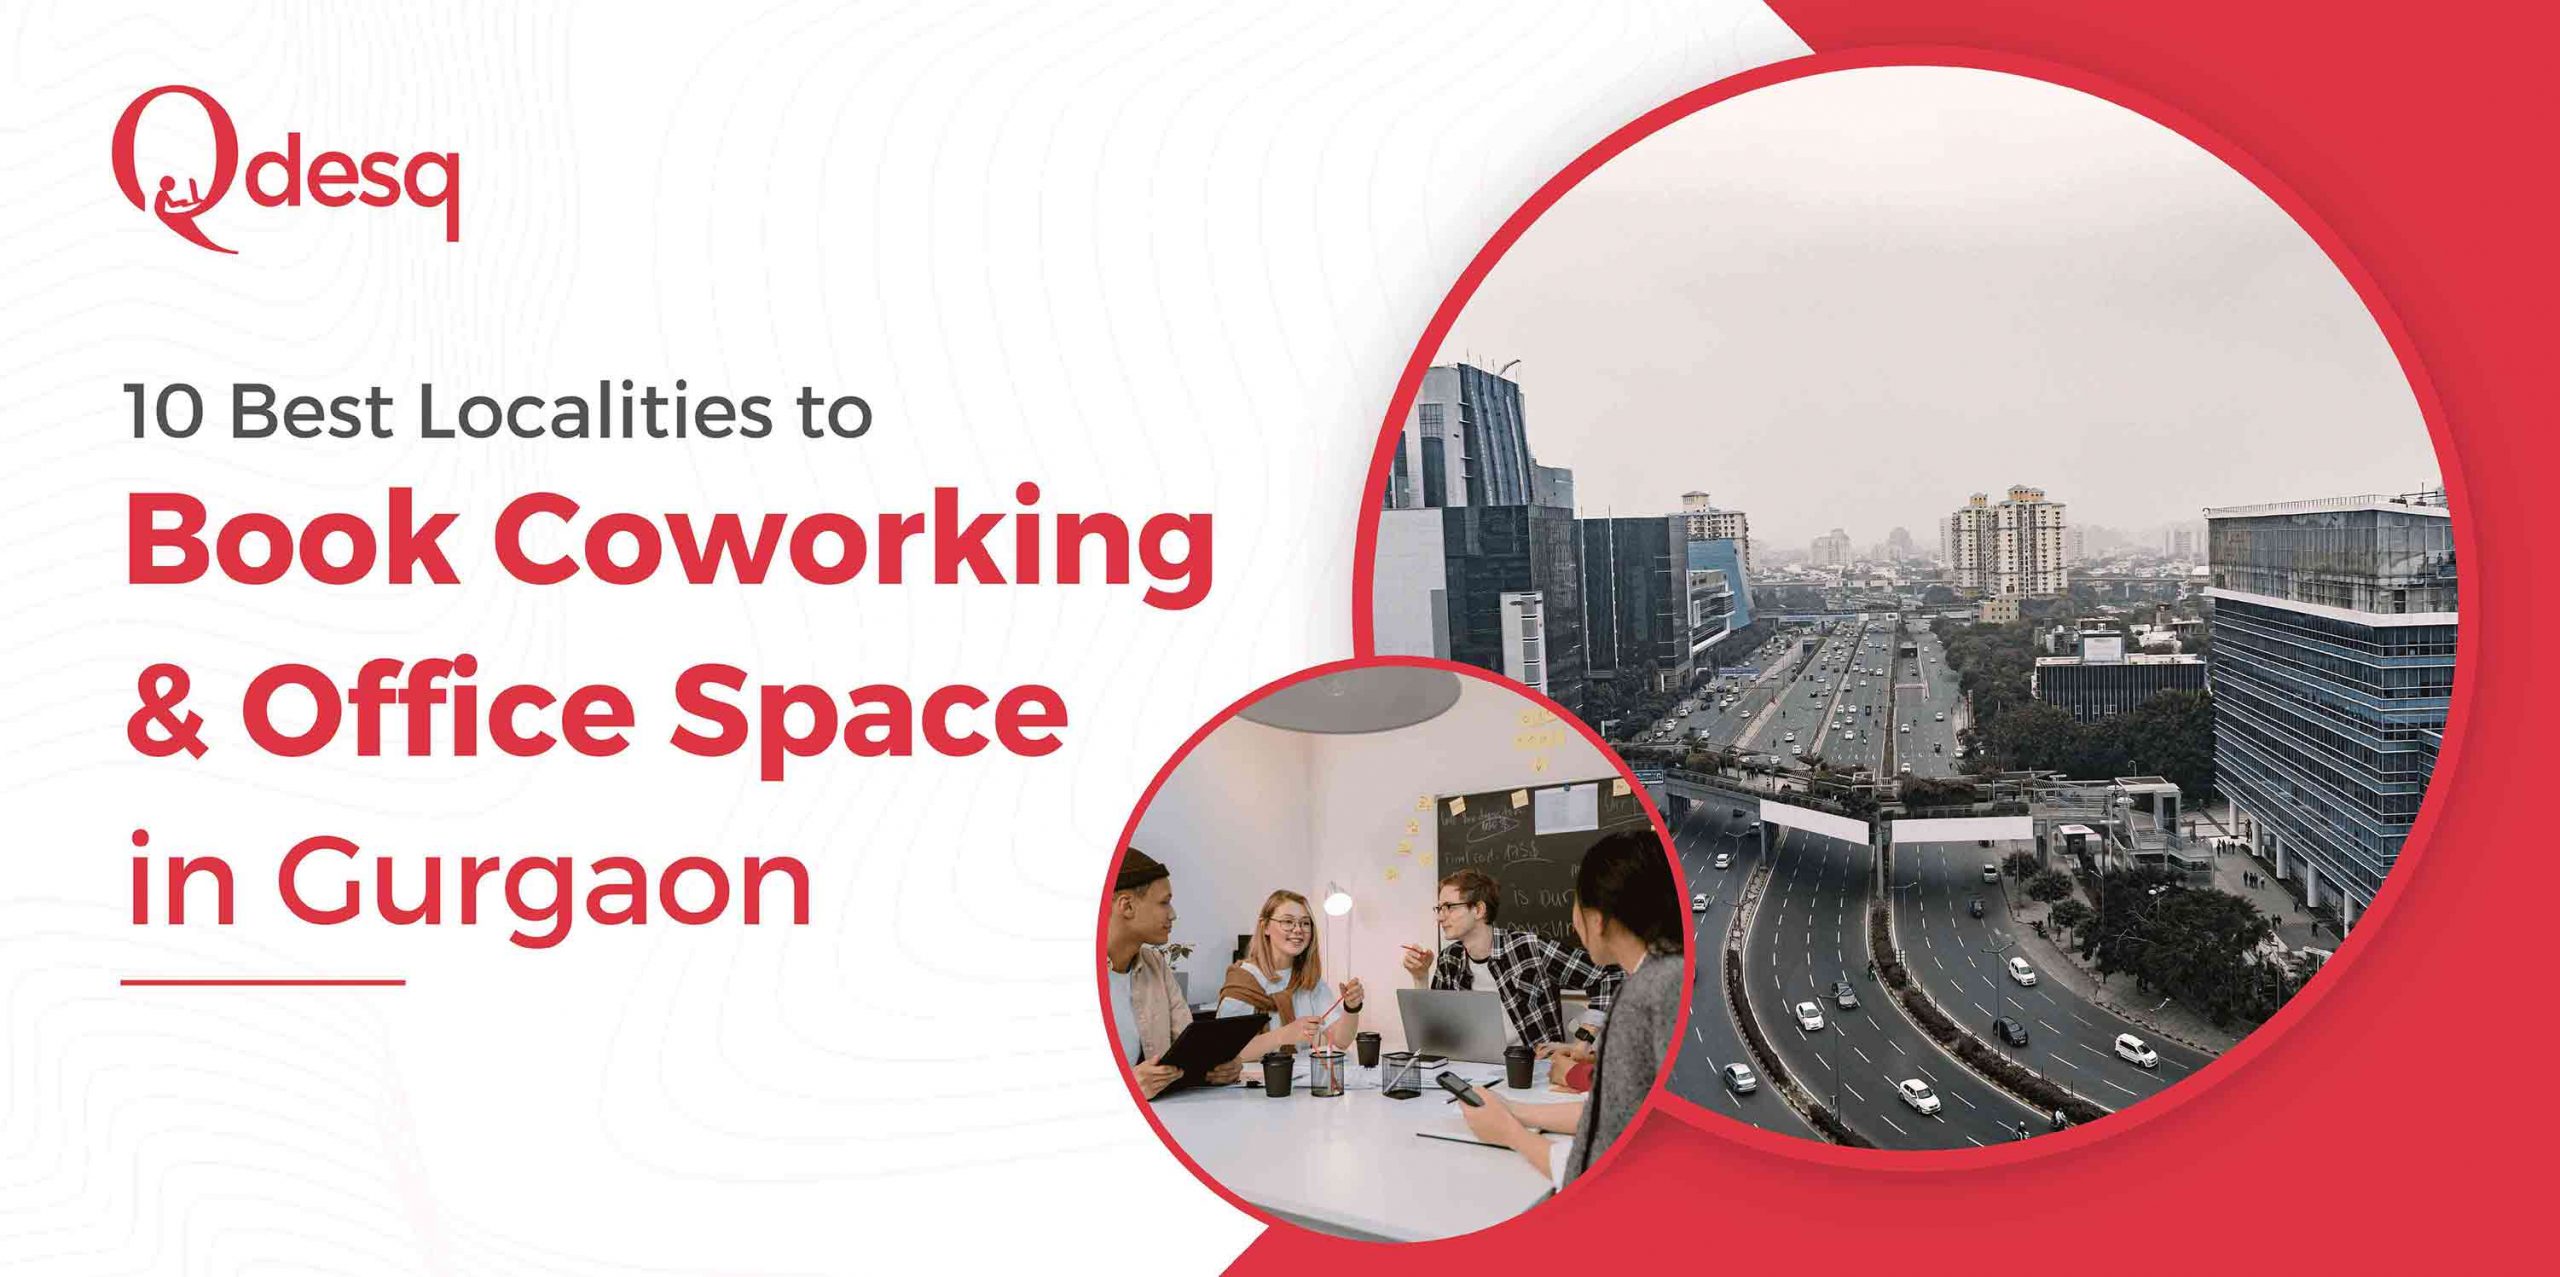 10 Best Localities to Book Coworking & Office Space in Gurgaon